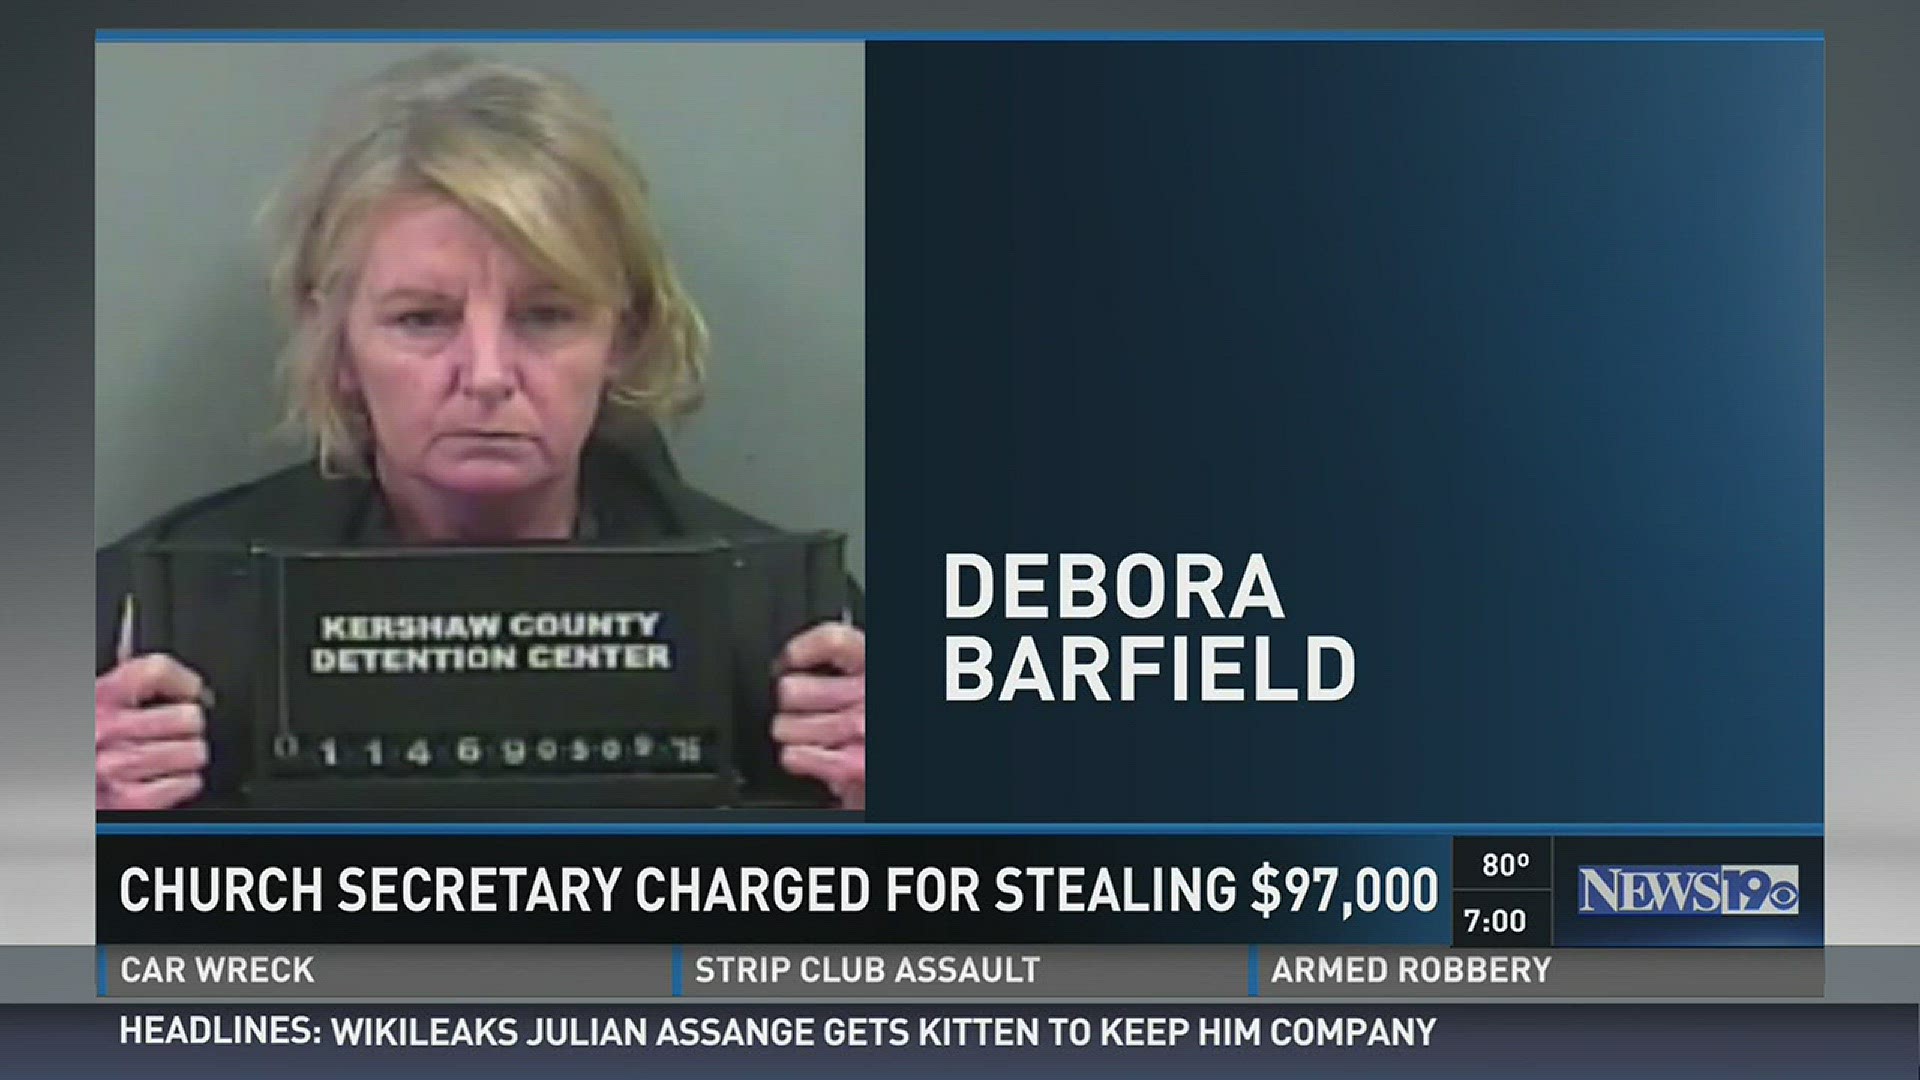 Church secretary charged with stealing $97K over a year from the church.